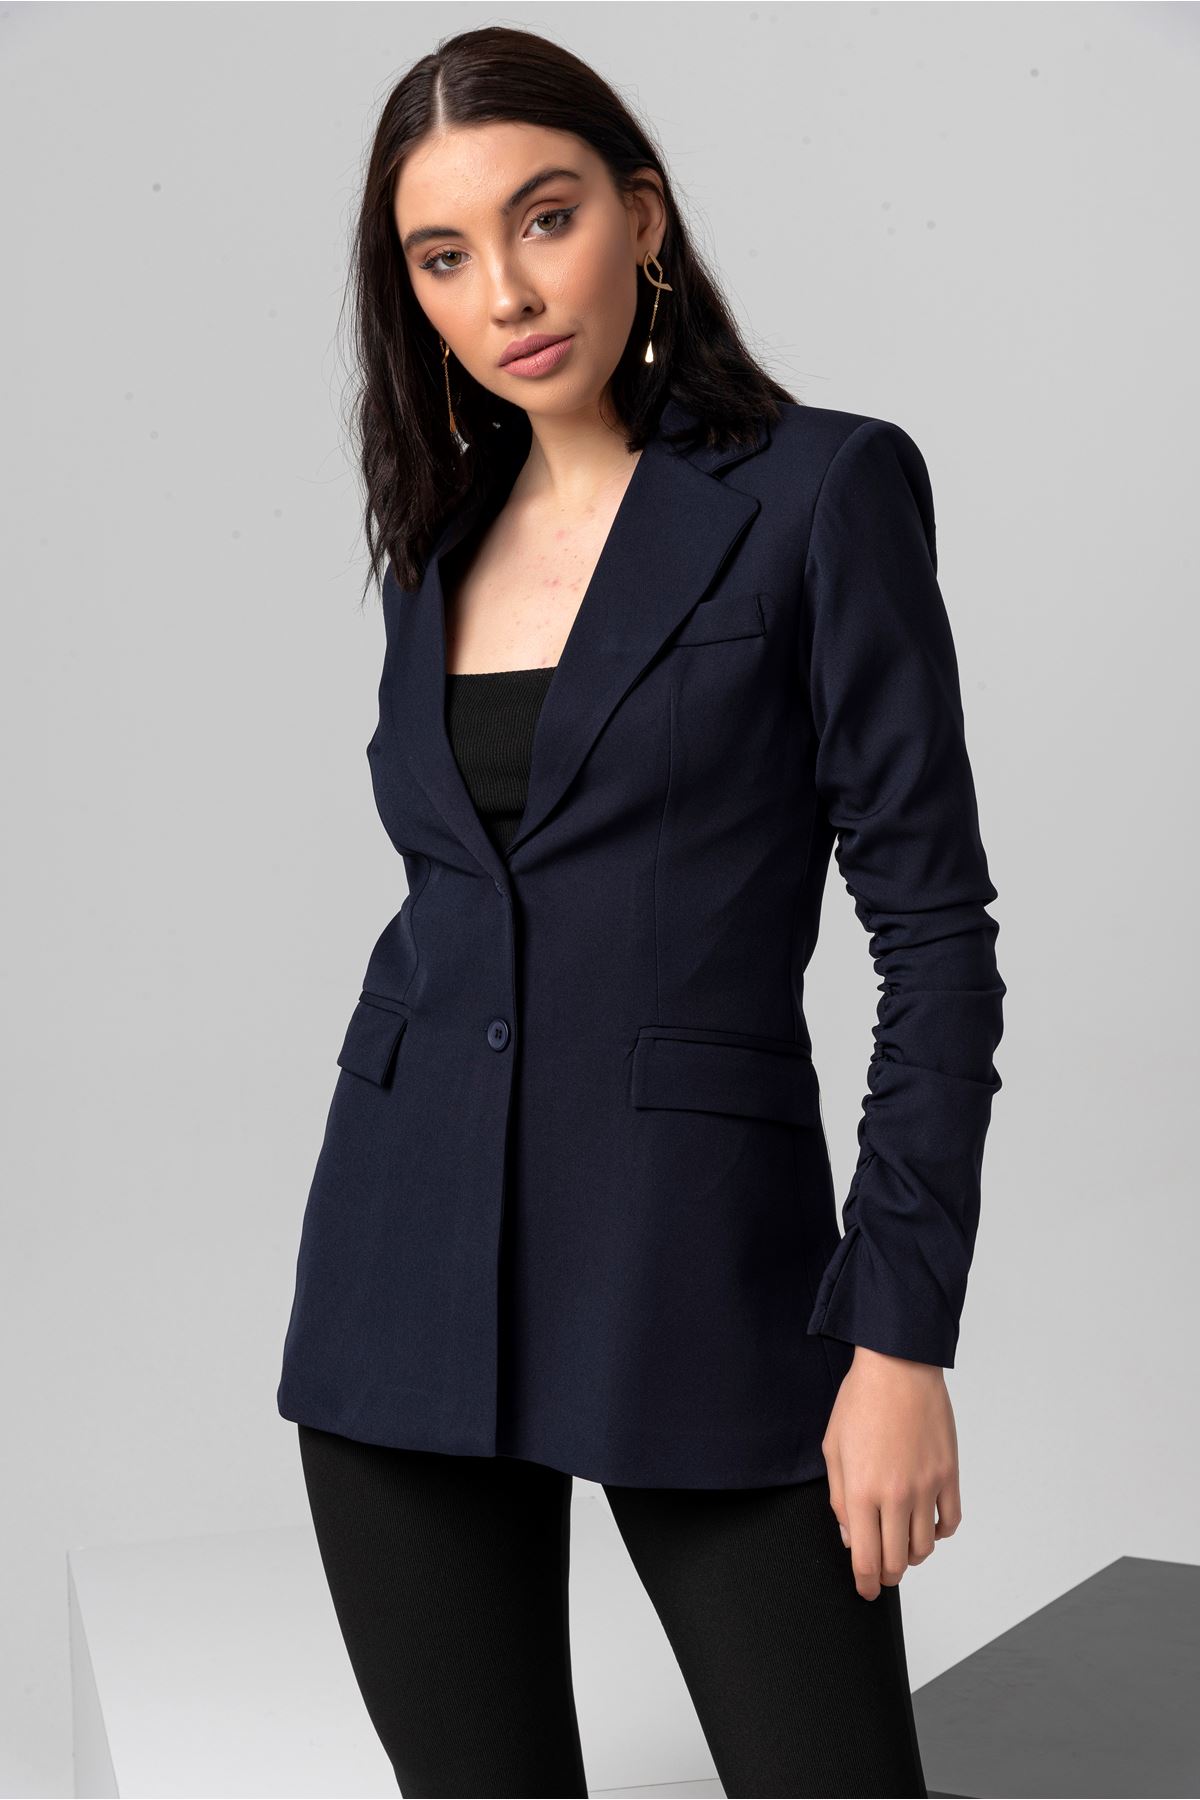 Polyester Fabric Hip Height Classical Shirred Sleeve Women Jacket - Navy Blue 